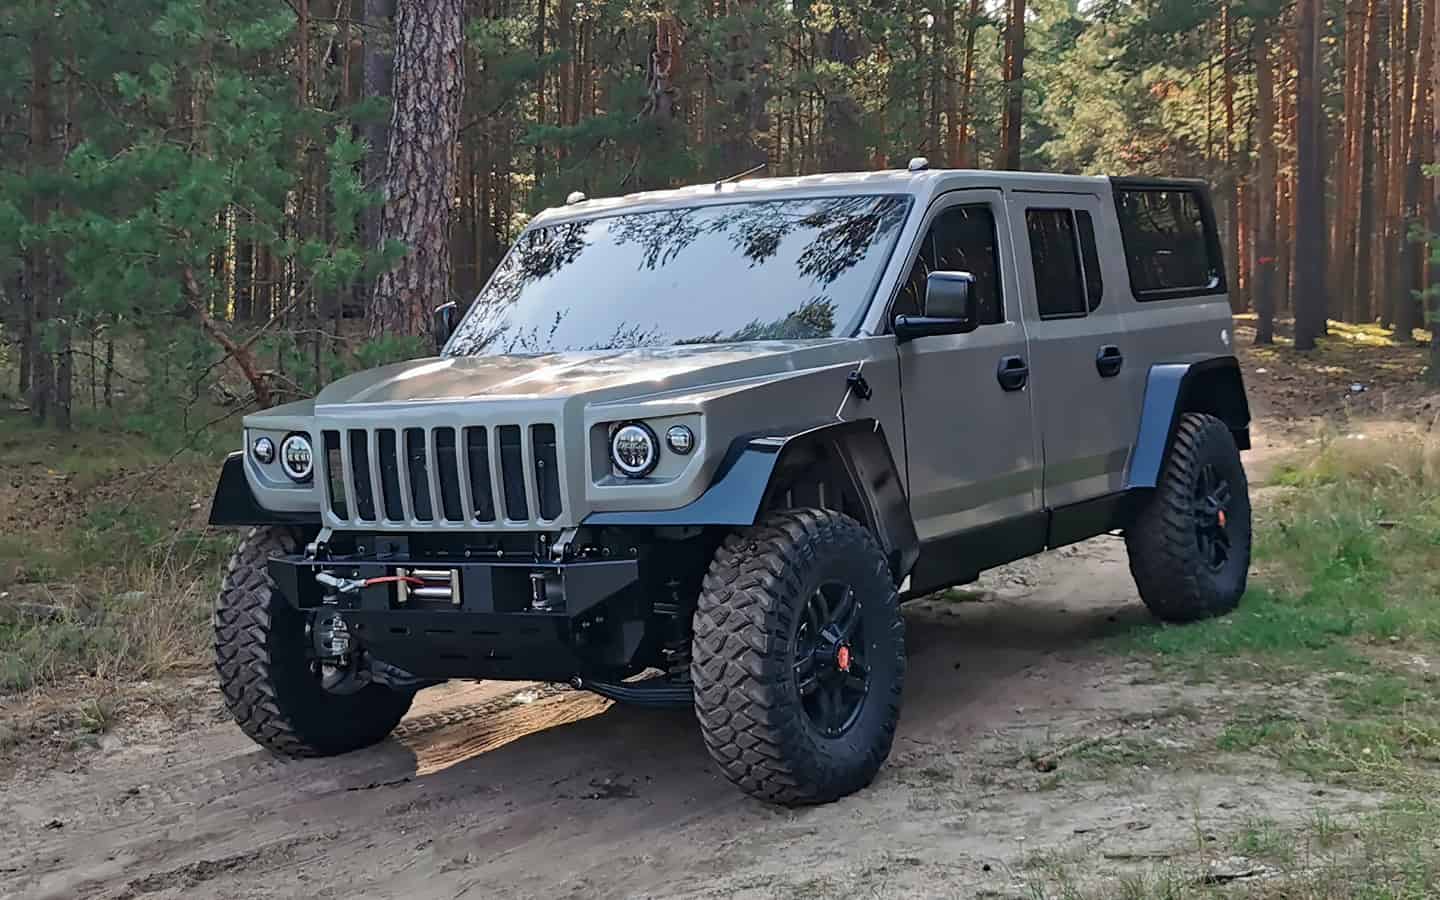 Russia has developed a large SUV "Strela" based on the "Gazelle"